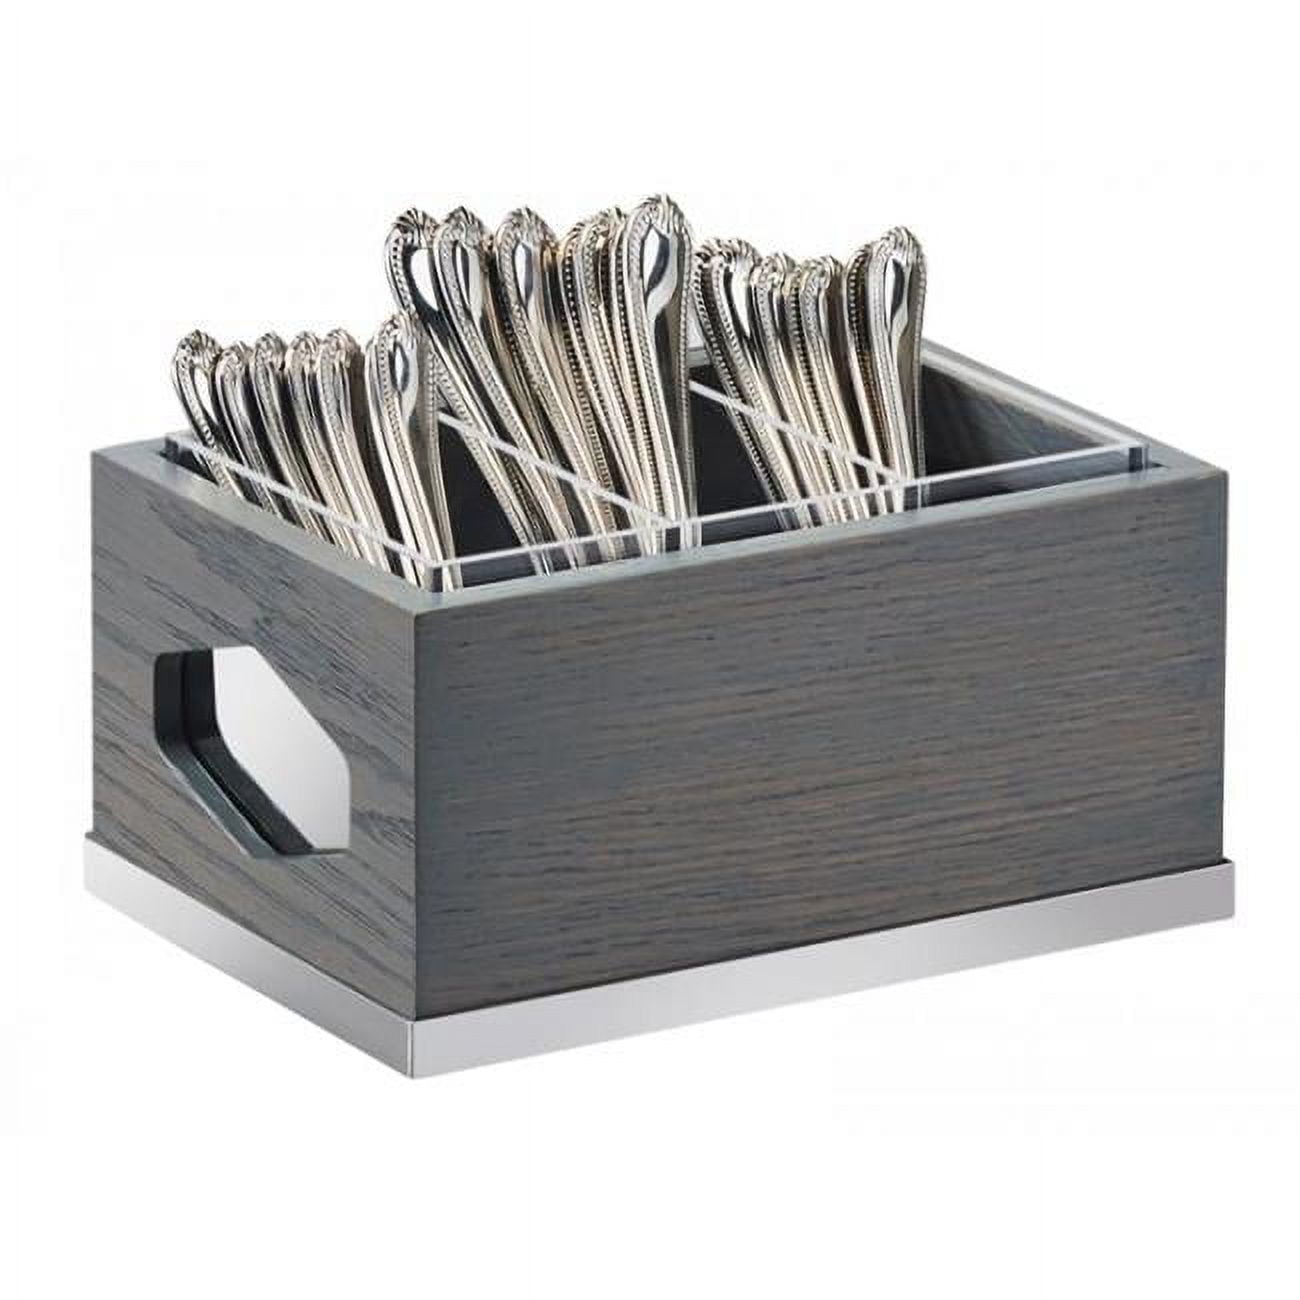 Picture of Cal Mil 3811-83 Ashwood 3 Compartment Gray Oak Wood Flatware Organizer - 9.5 x 6.75 x 4.75 in.